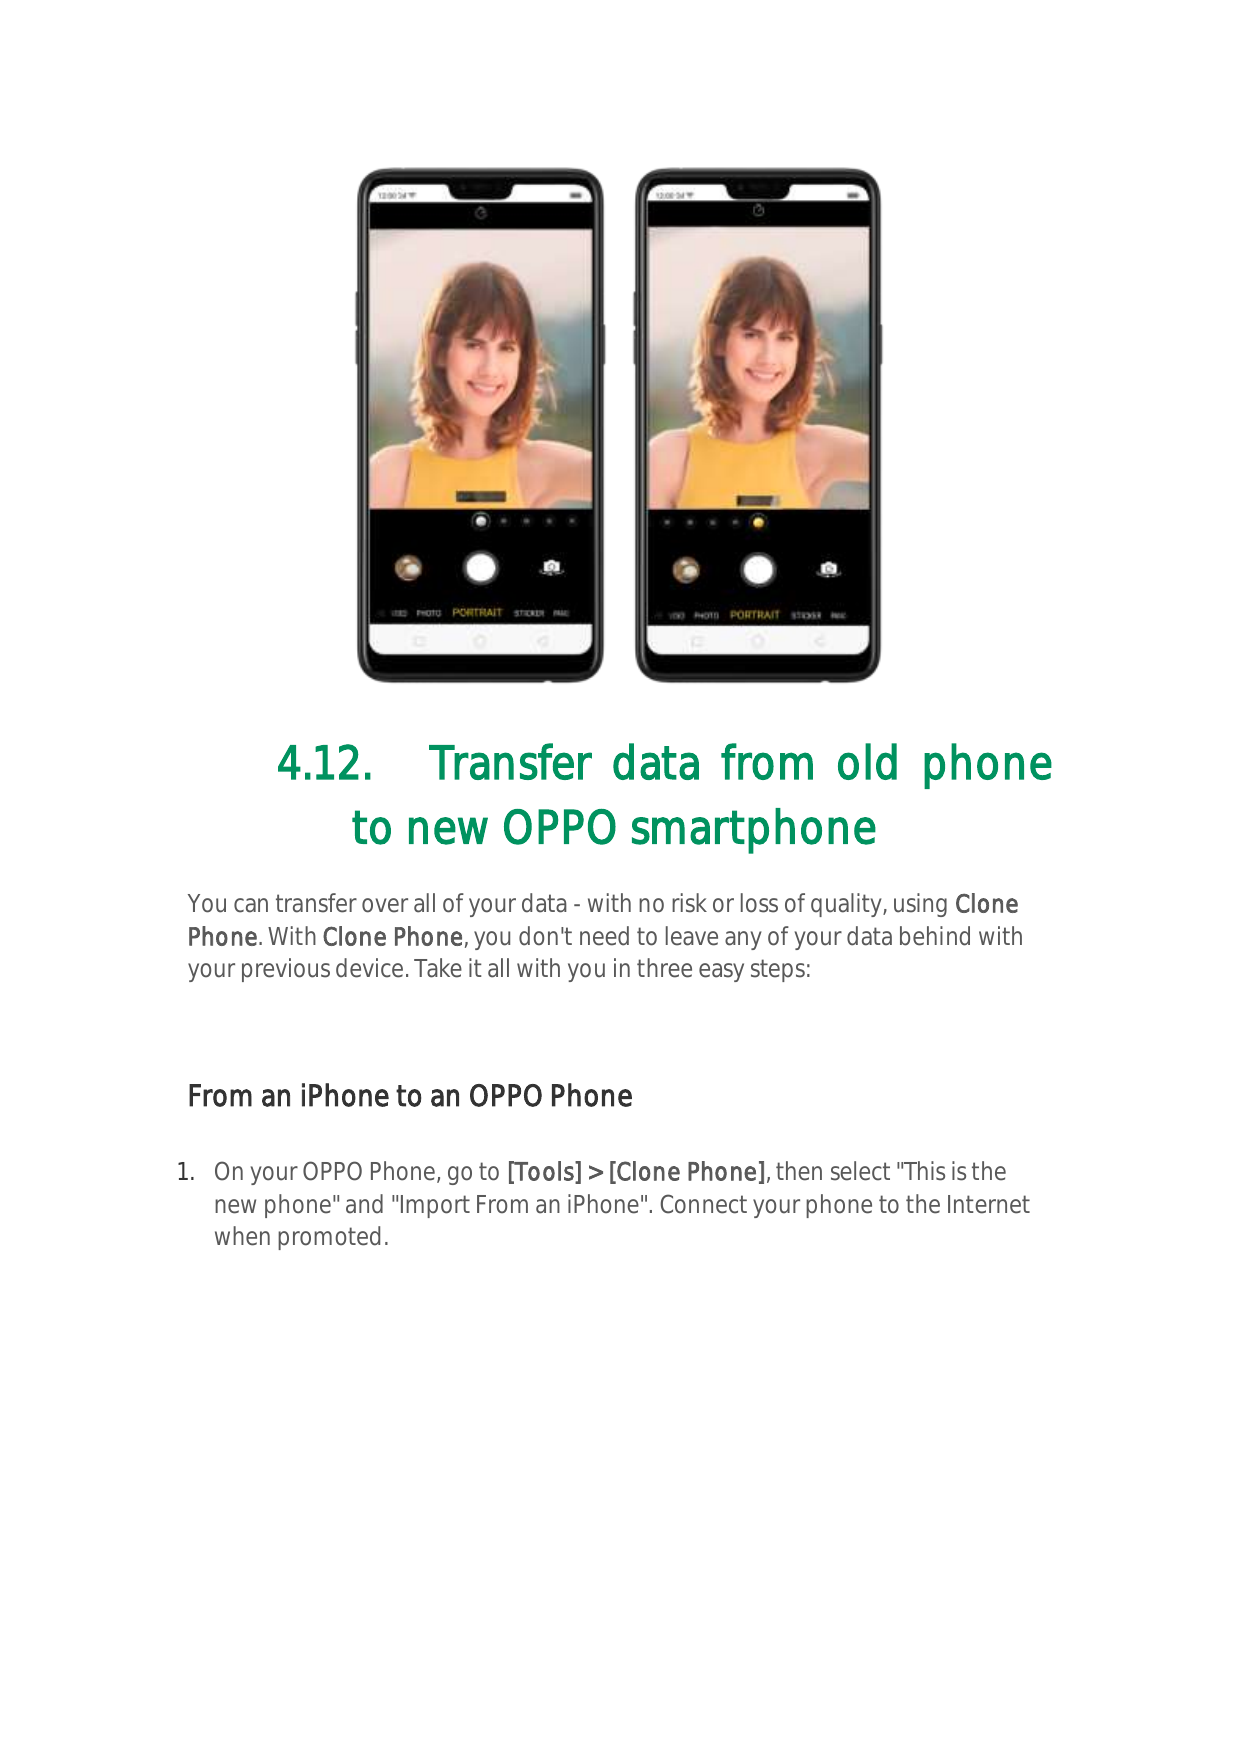 4.12. Transfer data from old phoneto new OPPO smartphoneYou can transfer over all of your data - with no risk or loss of quality